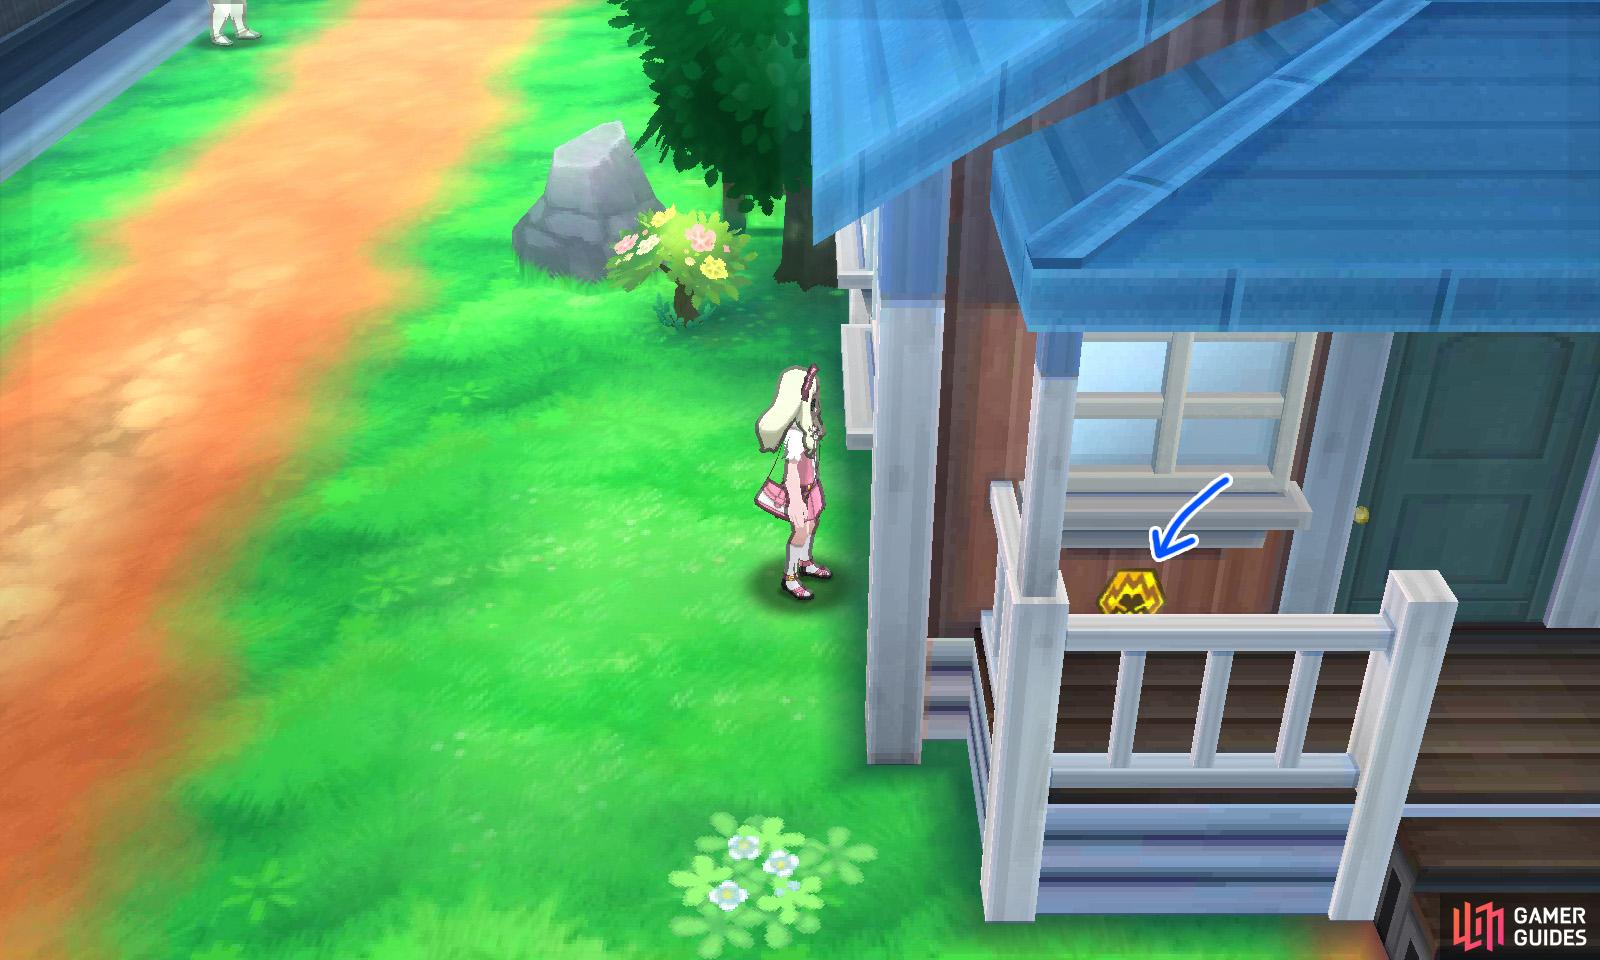 013: Left of the entrance to Guzma's house.